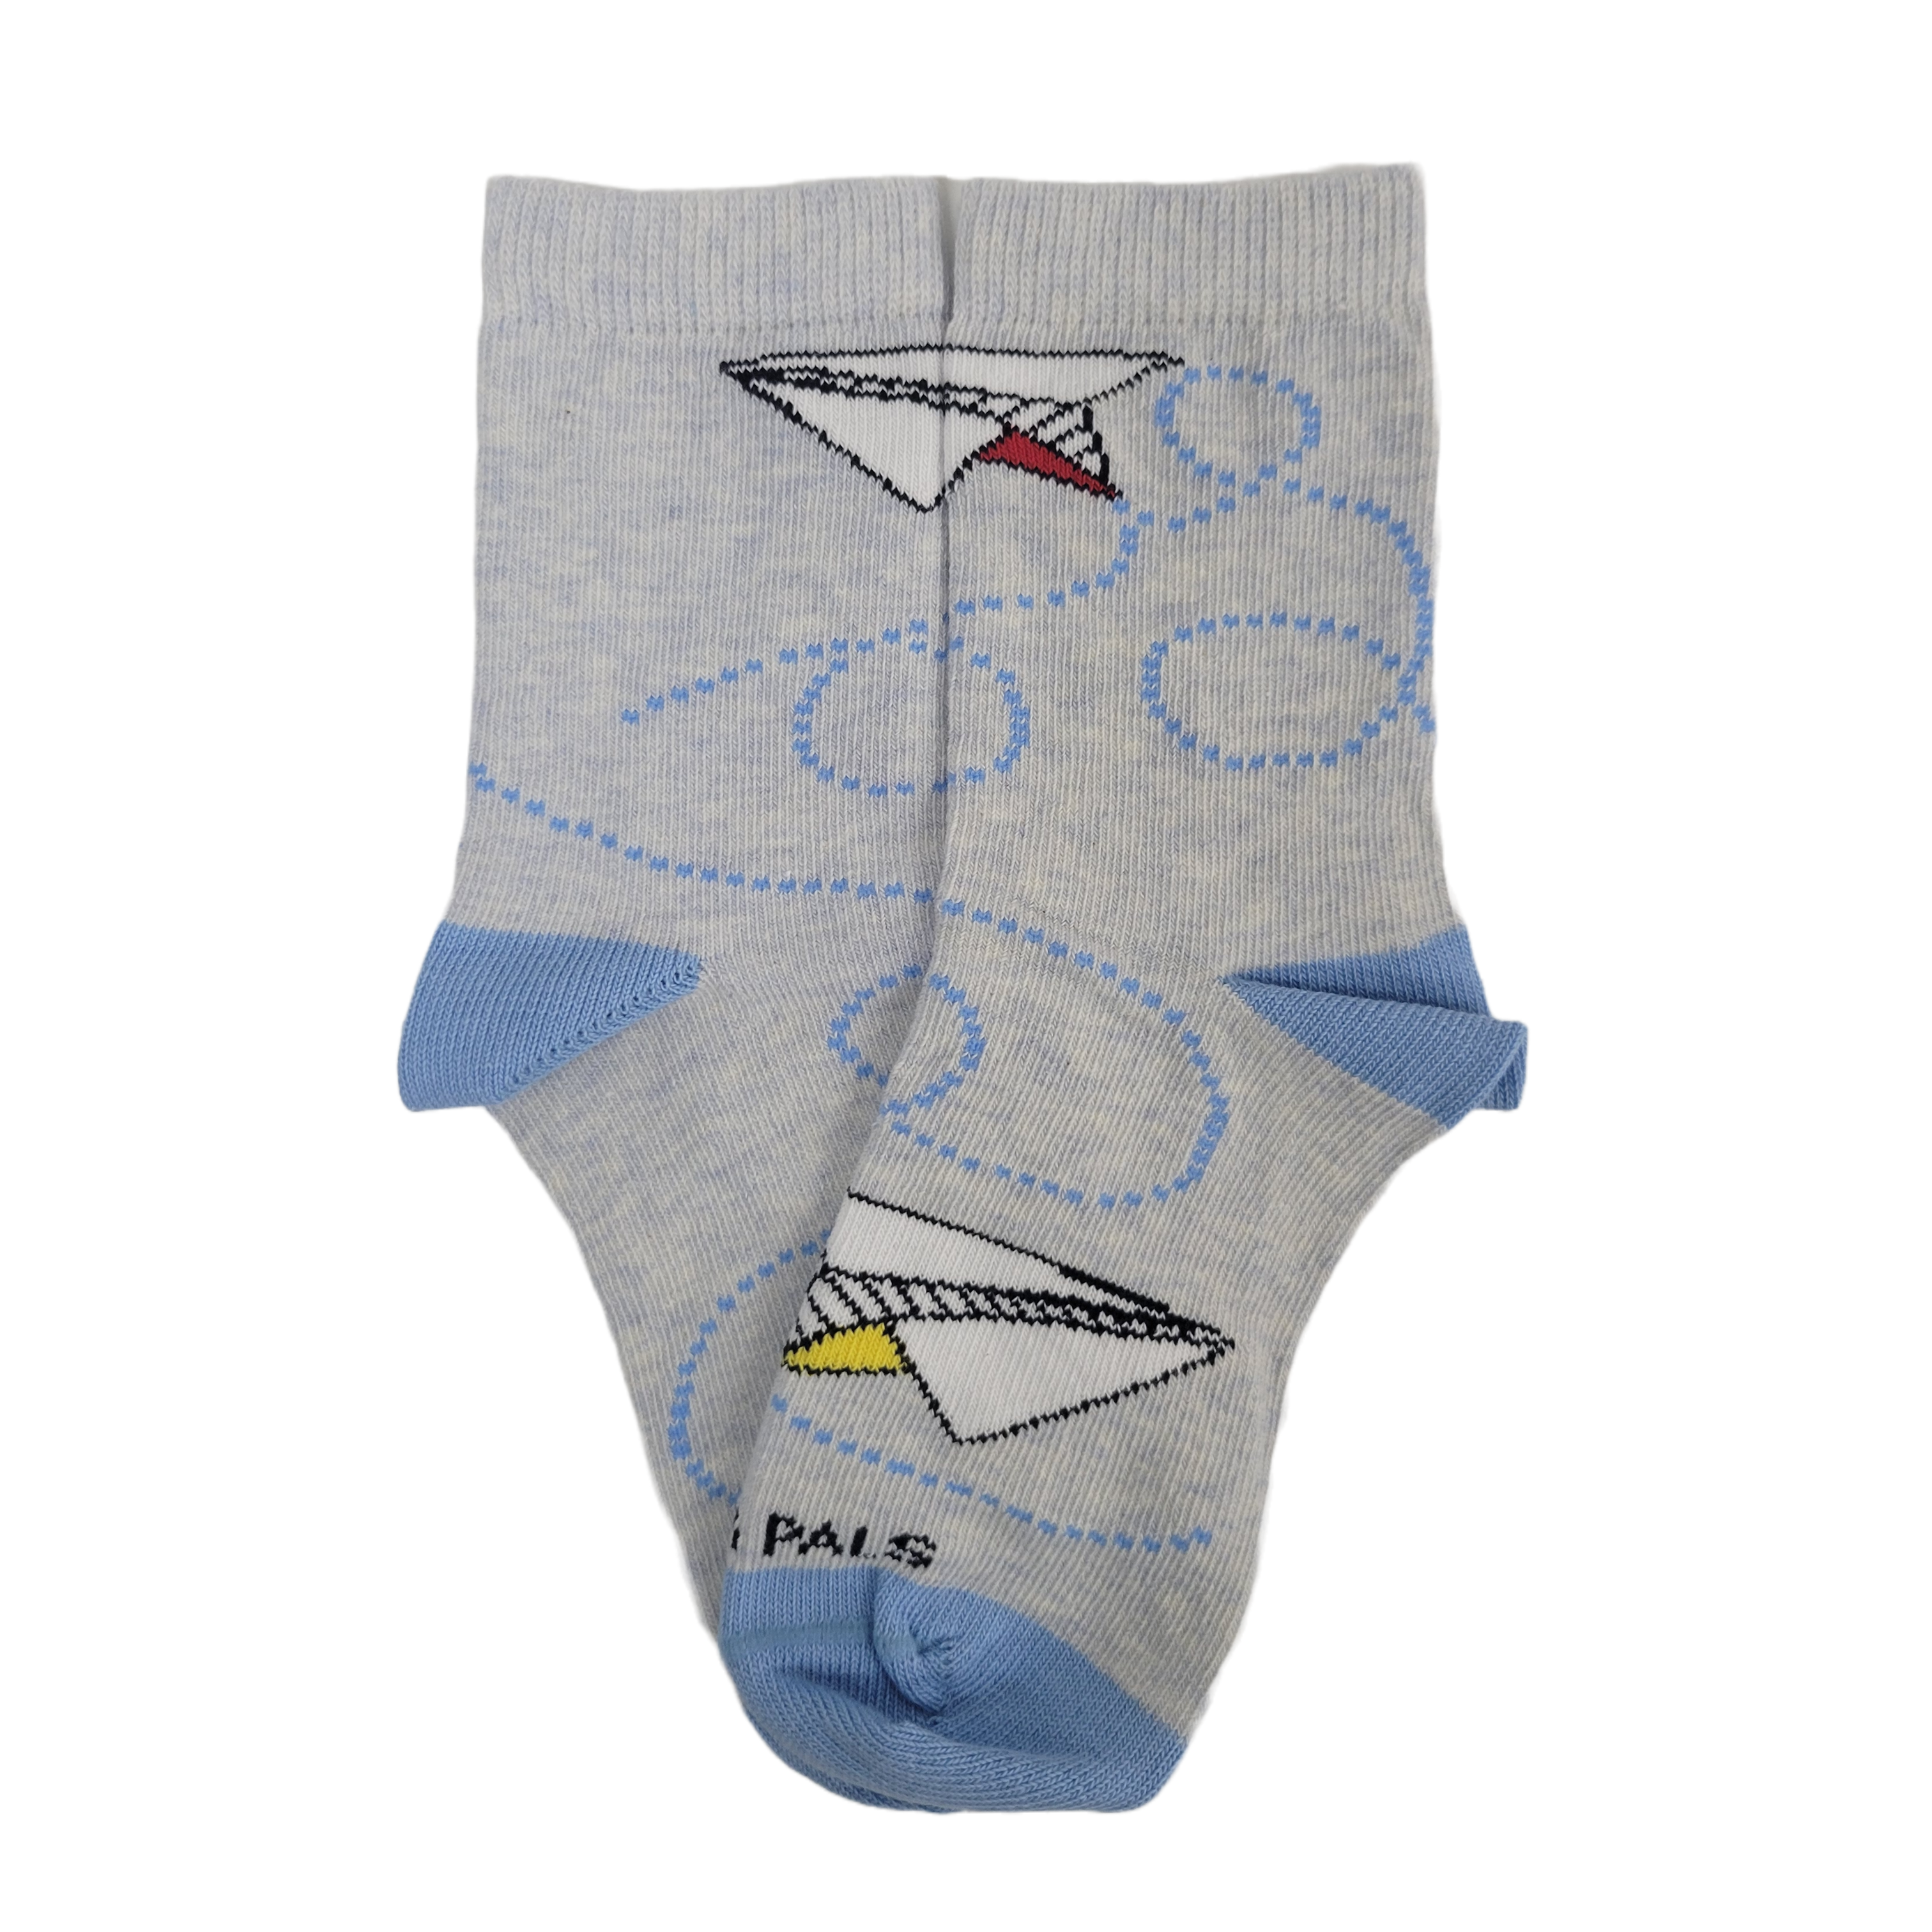 Paper Airplane Socks from the Sock Panda (Ages 3-5)